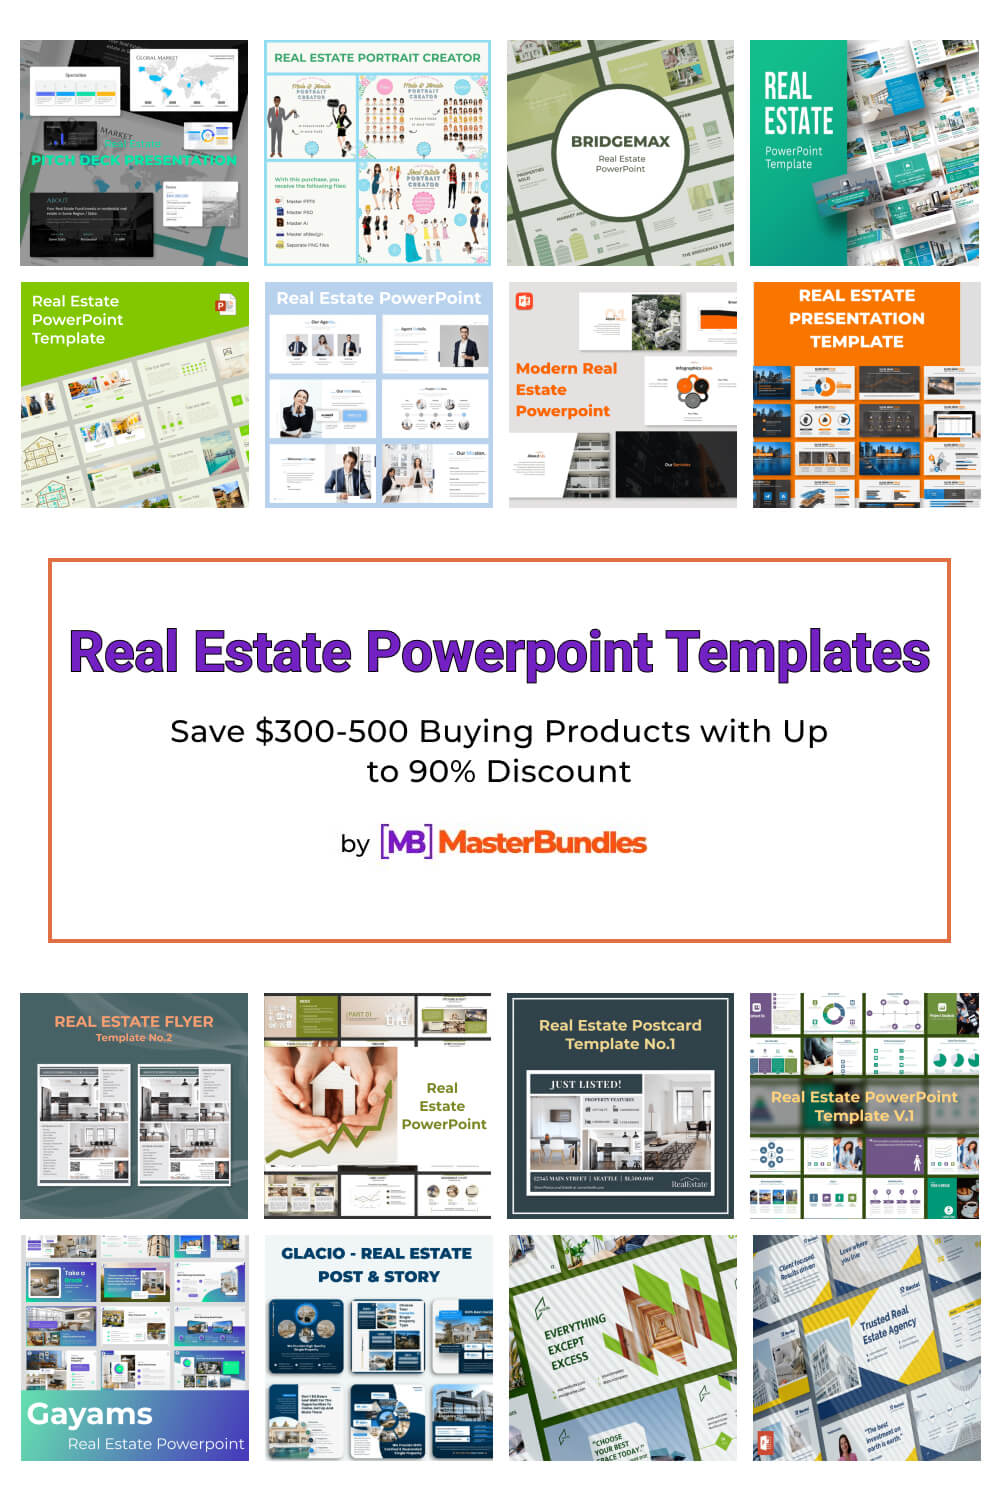 real estate powerpoint templates pinterest image.